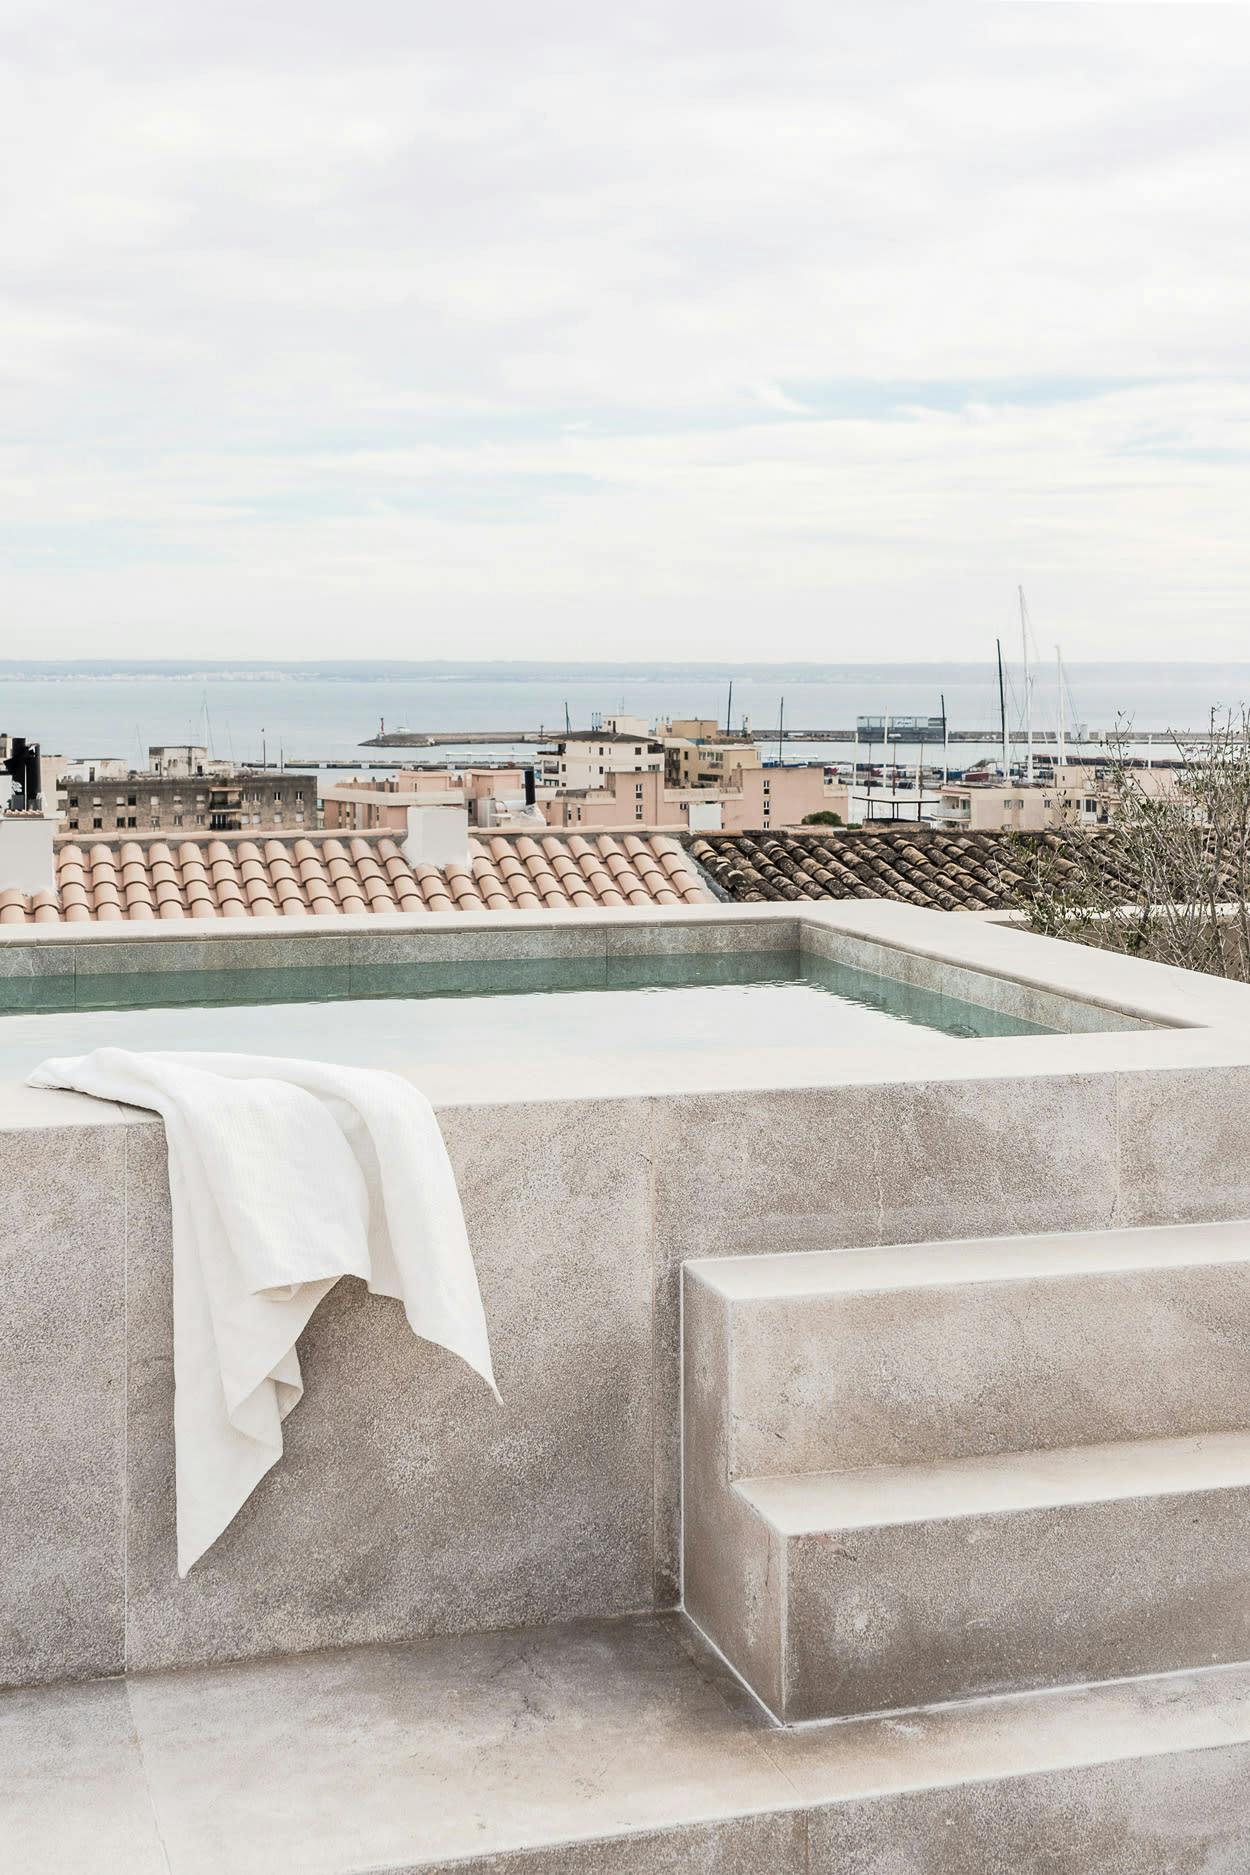 A large concrete pool with a white towel is located on a rooftop overlooking the ocean.